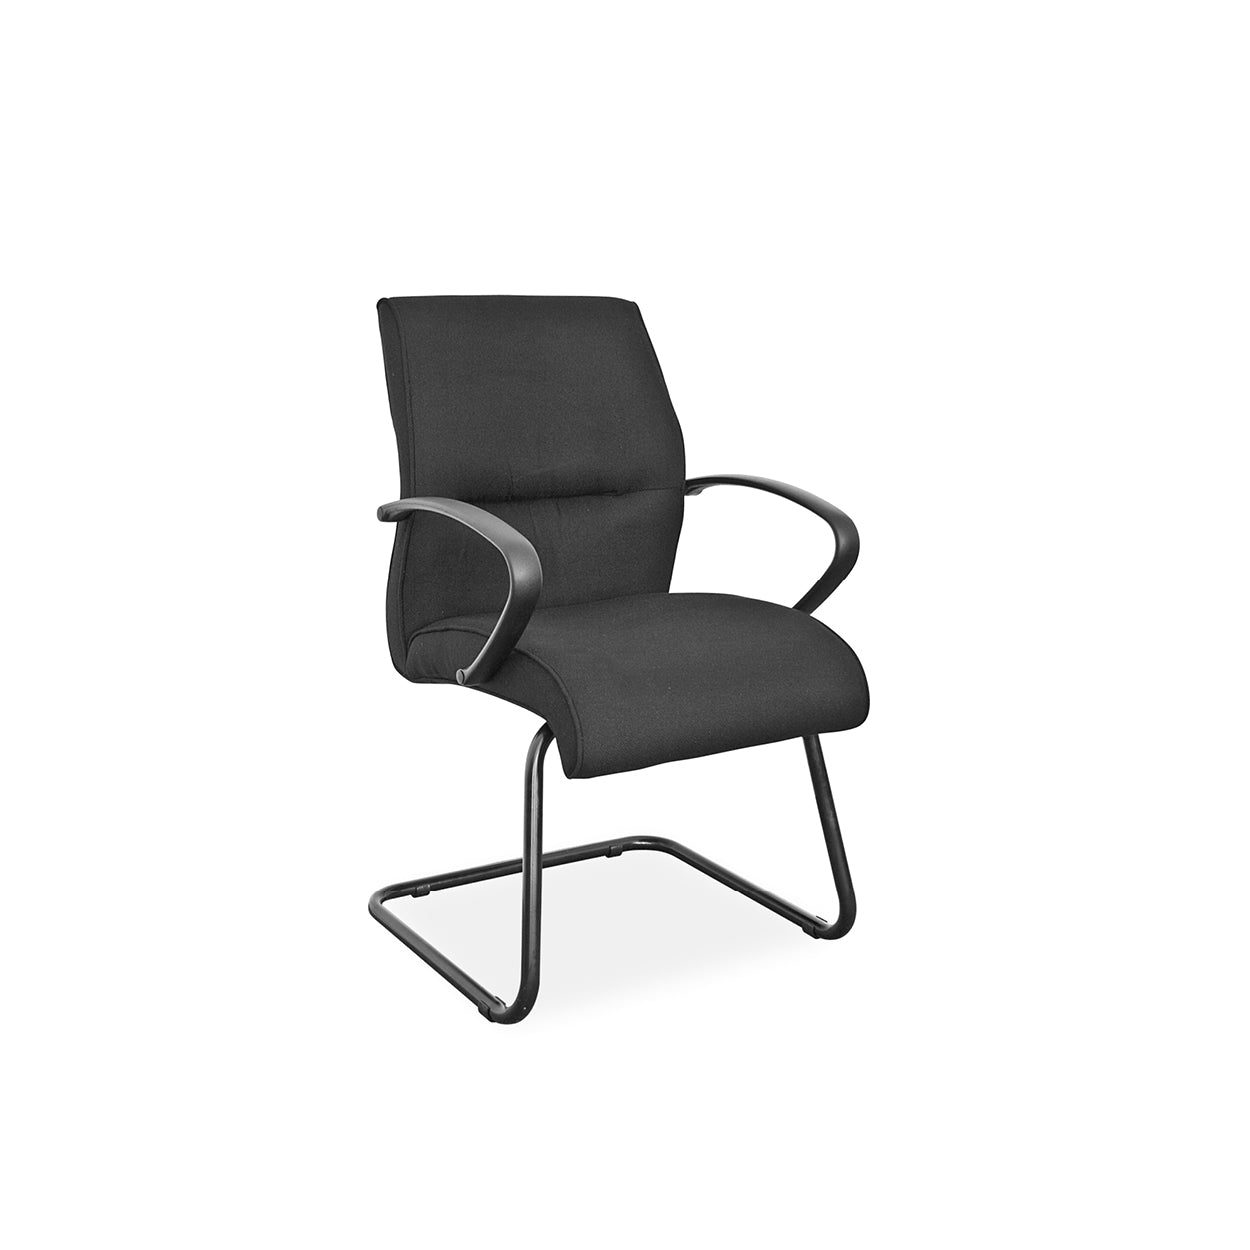 Hedcor Salvador PU office chair